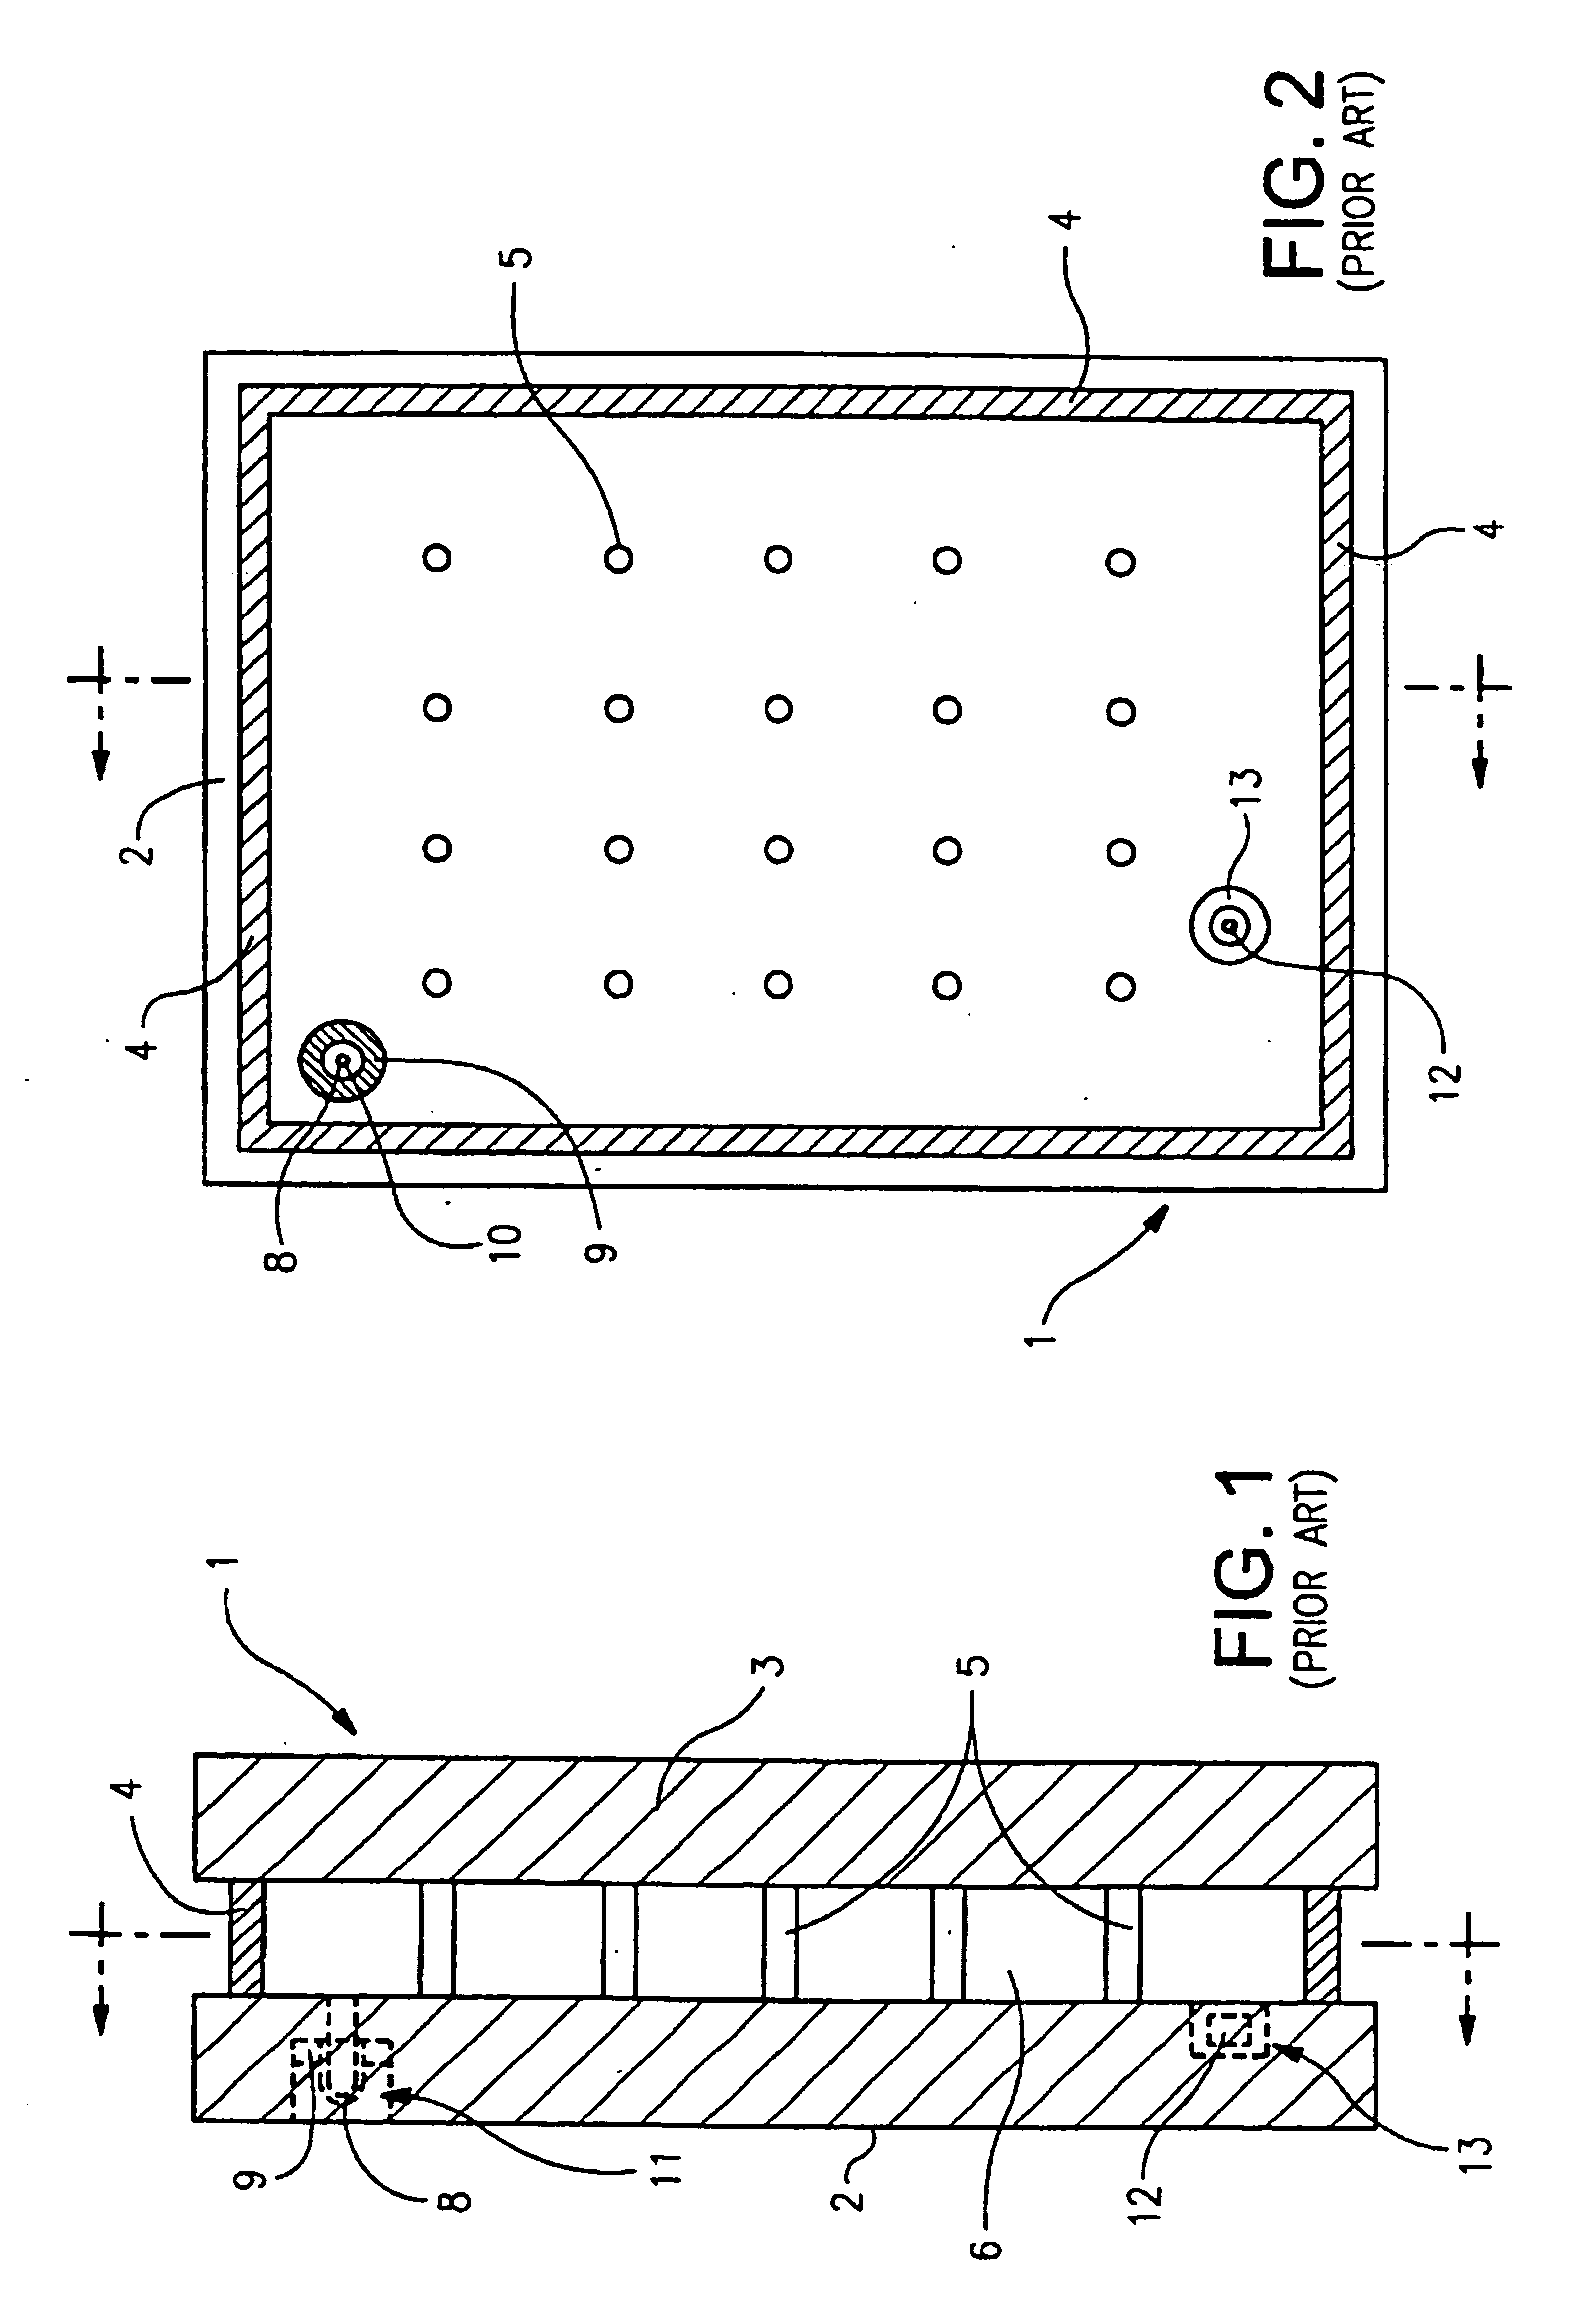 Frit or solder glass compound including beads, and assemblies incorporating the same